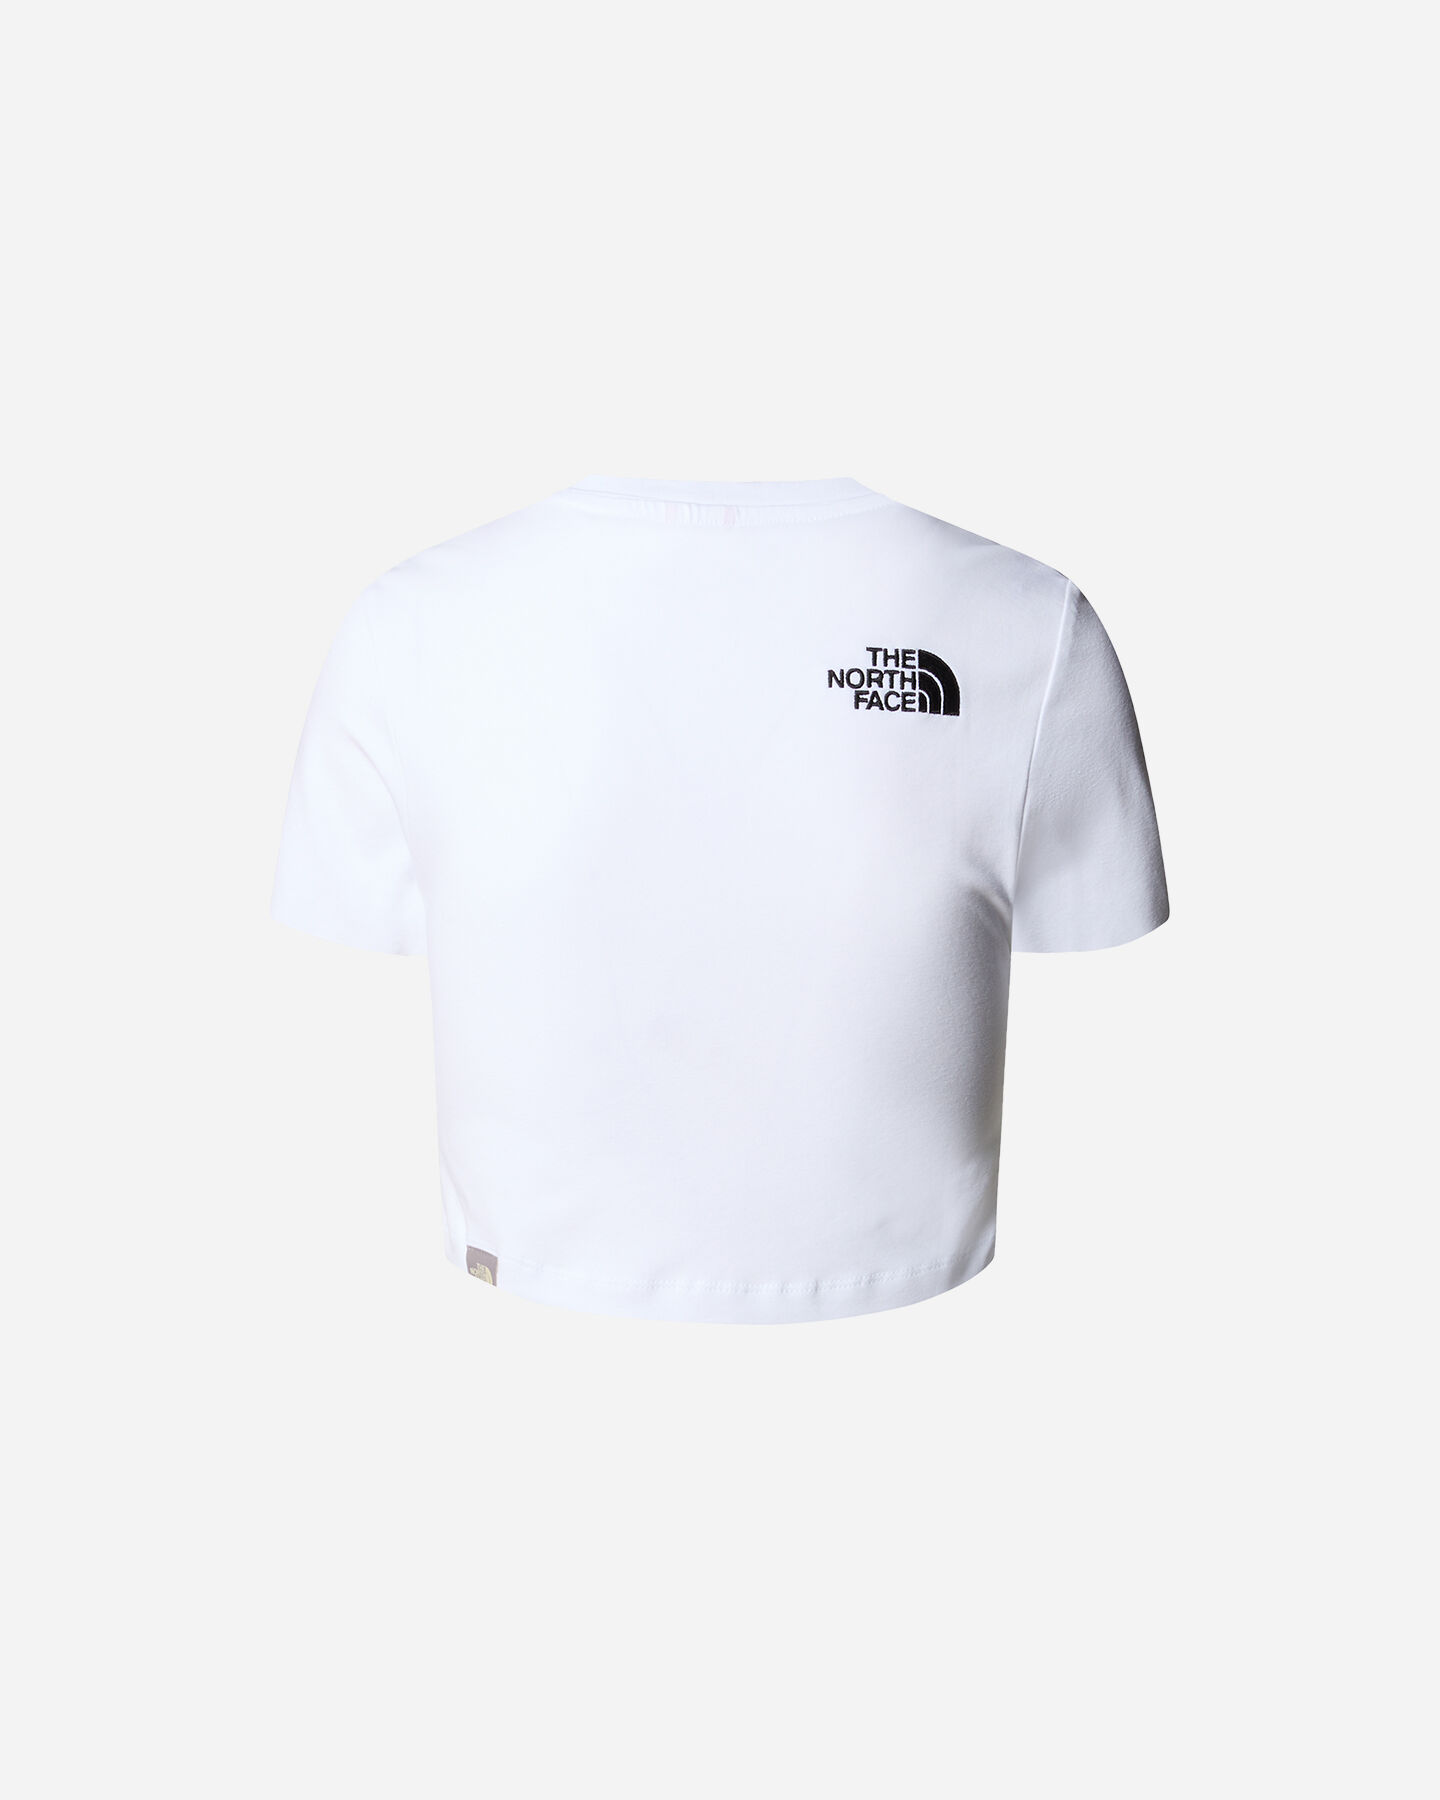  T-Shirt THE NORTH FACE SMALL LOGO W S5474647|FN4|XS scatto 1